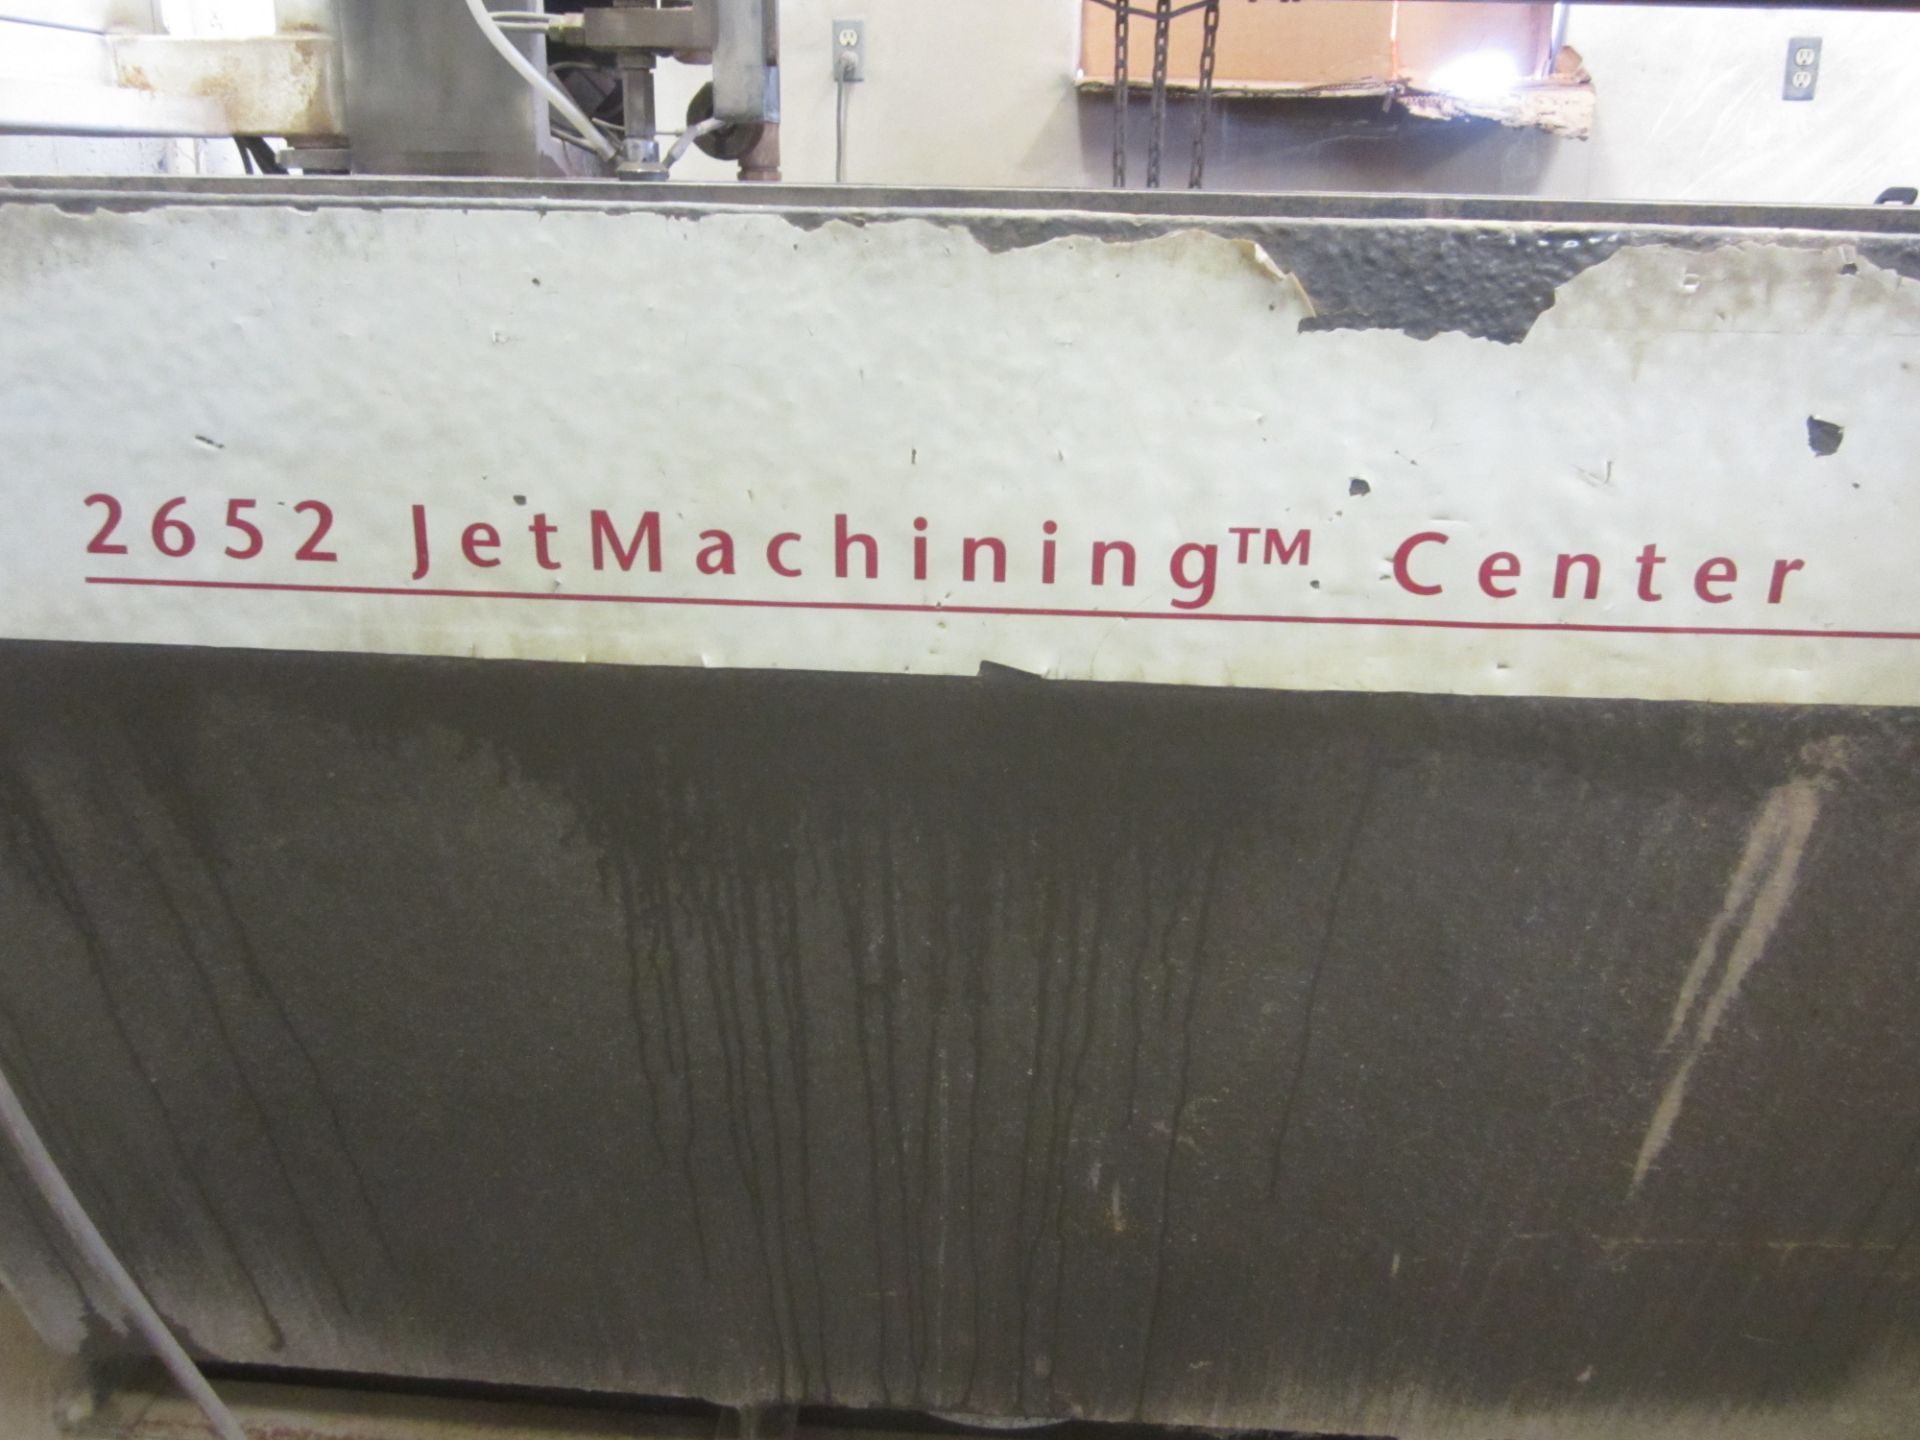 Omax Model 2652 Water Jet Machining Center, s/n A511535, with Accustream Model AS-6030, 60,000 PSI - Image 9 of 12